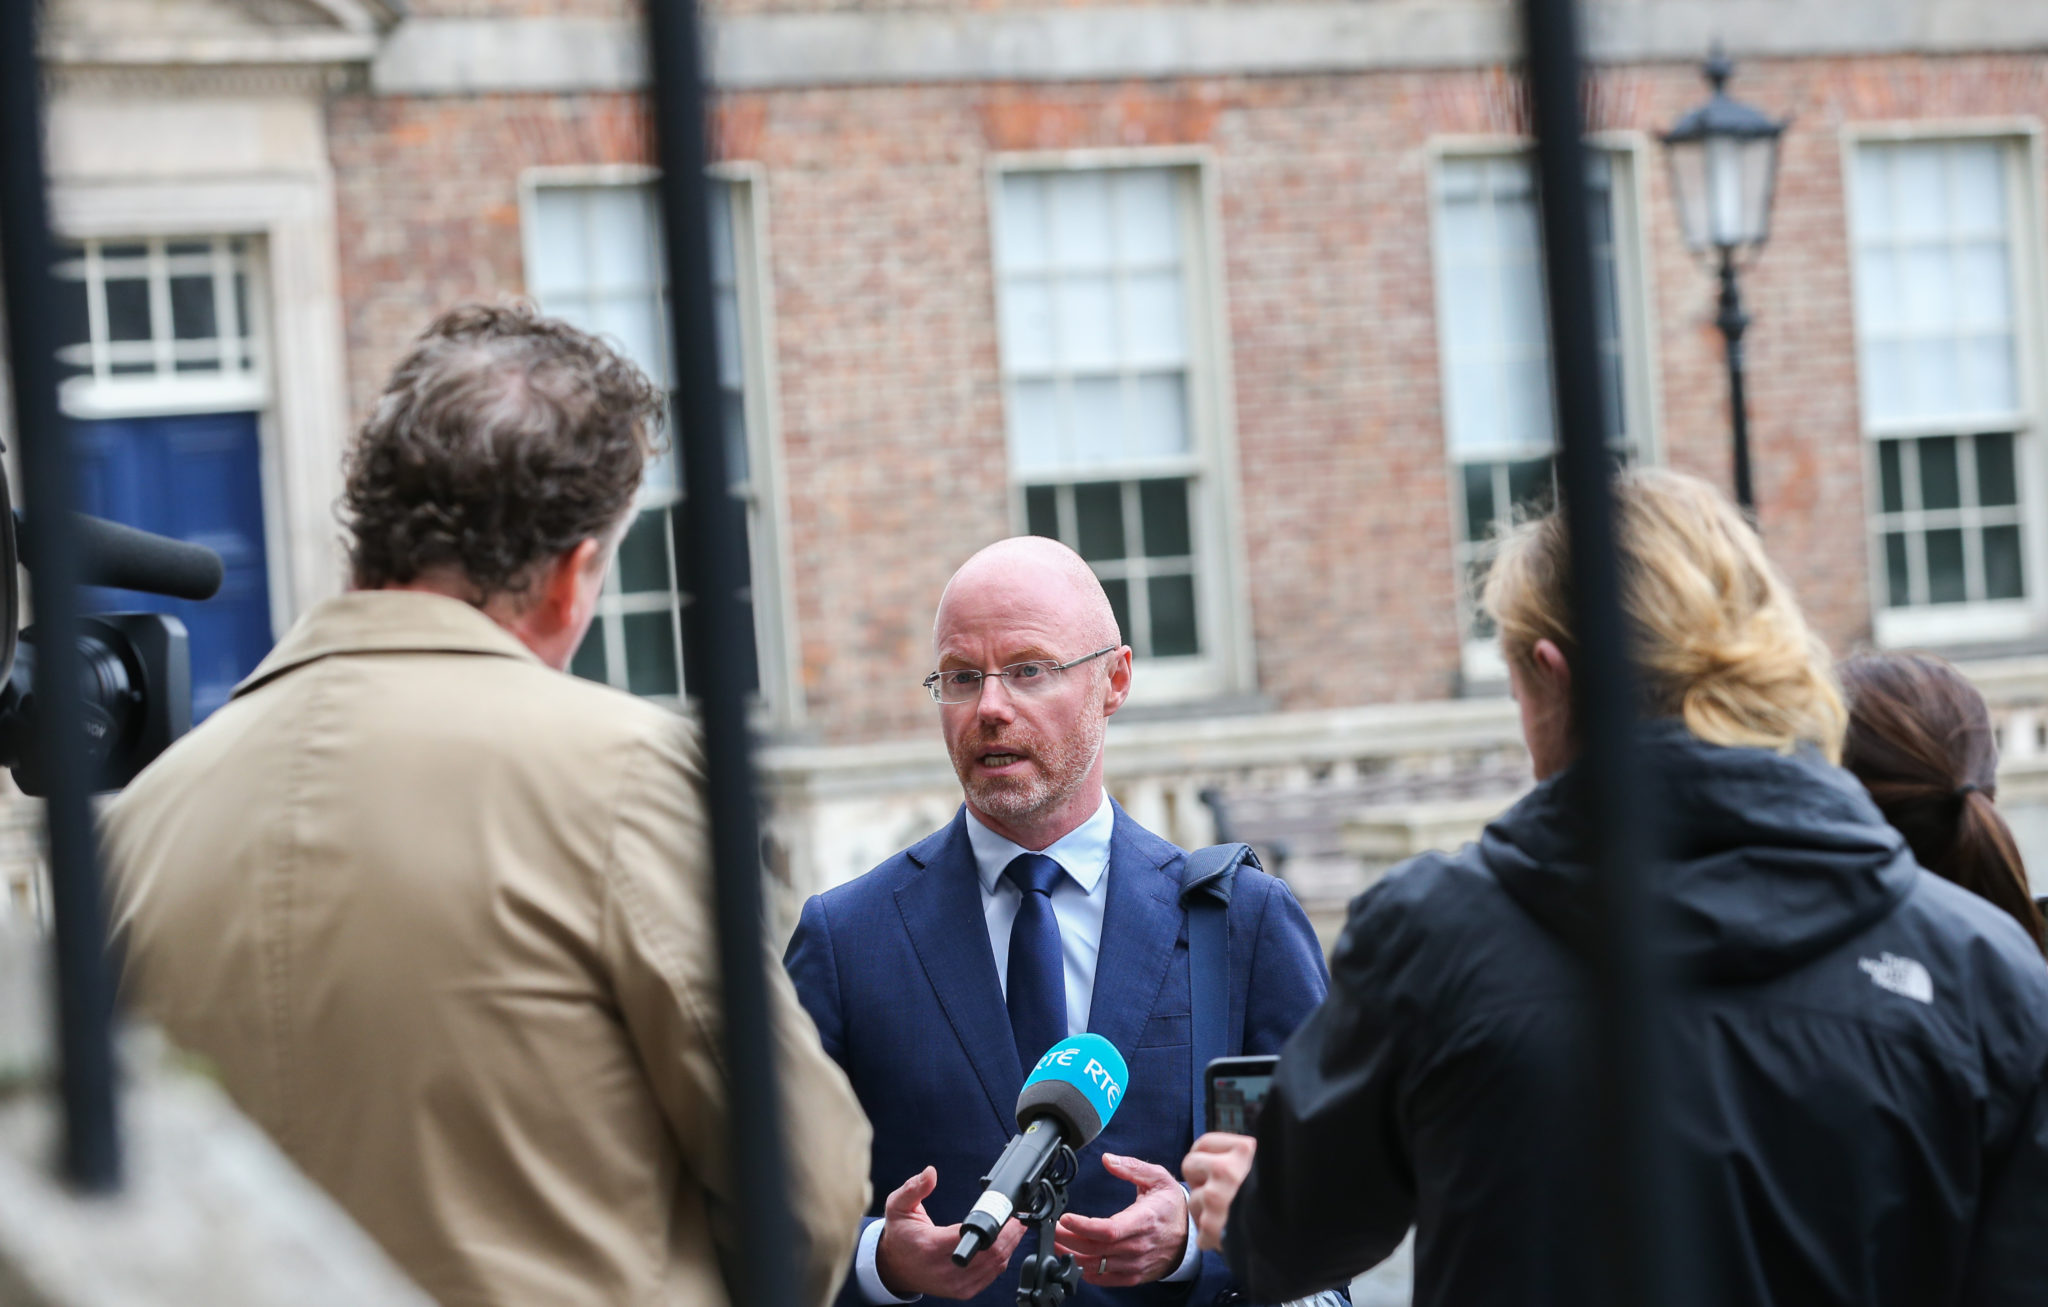 Stephen Donnelly speaking to media as he arrives at Dublin Castle for the Cabinet meeting